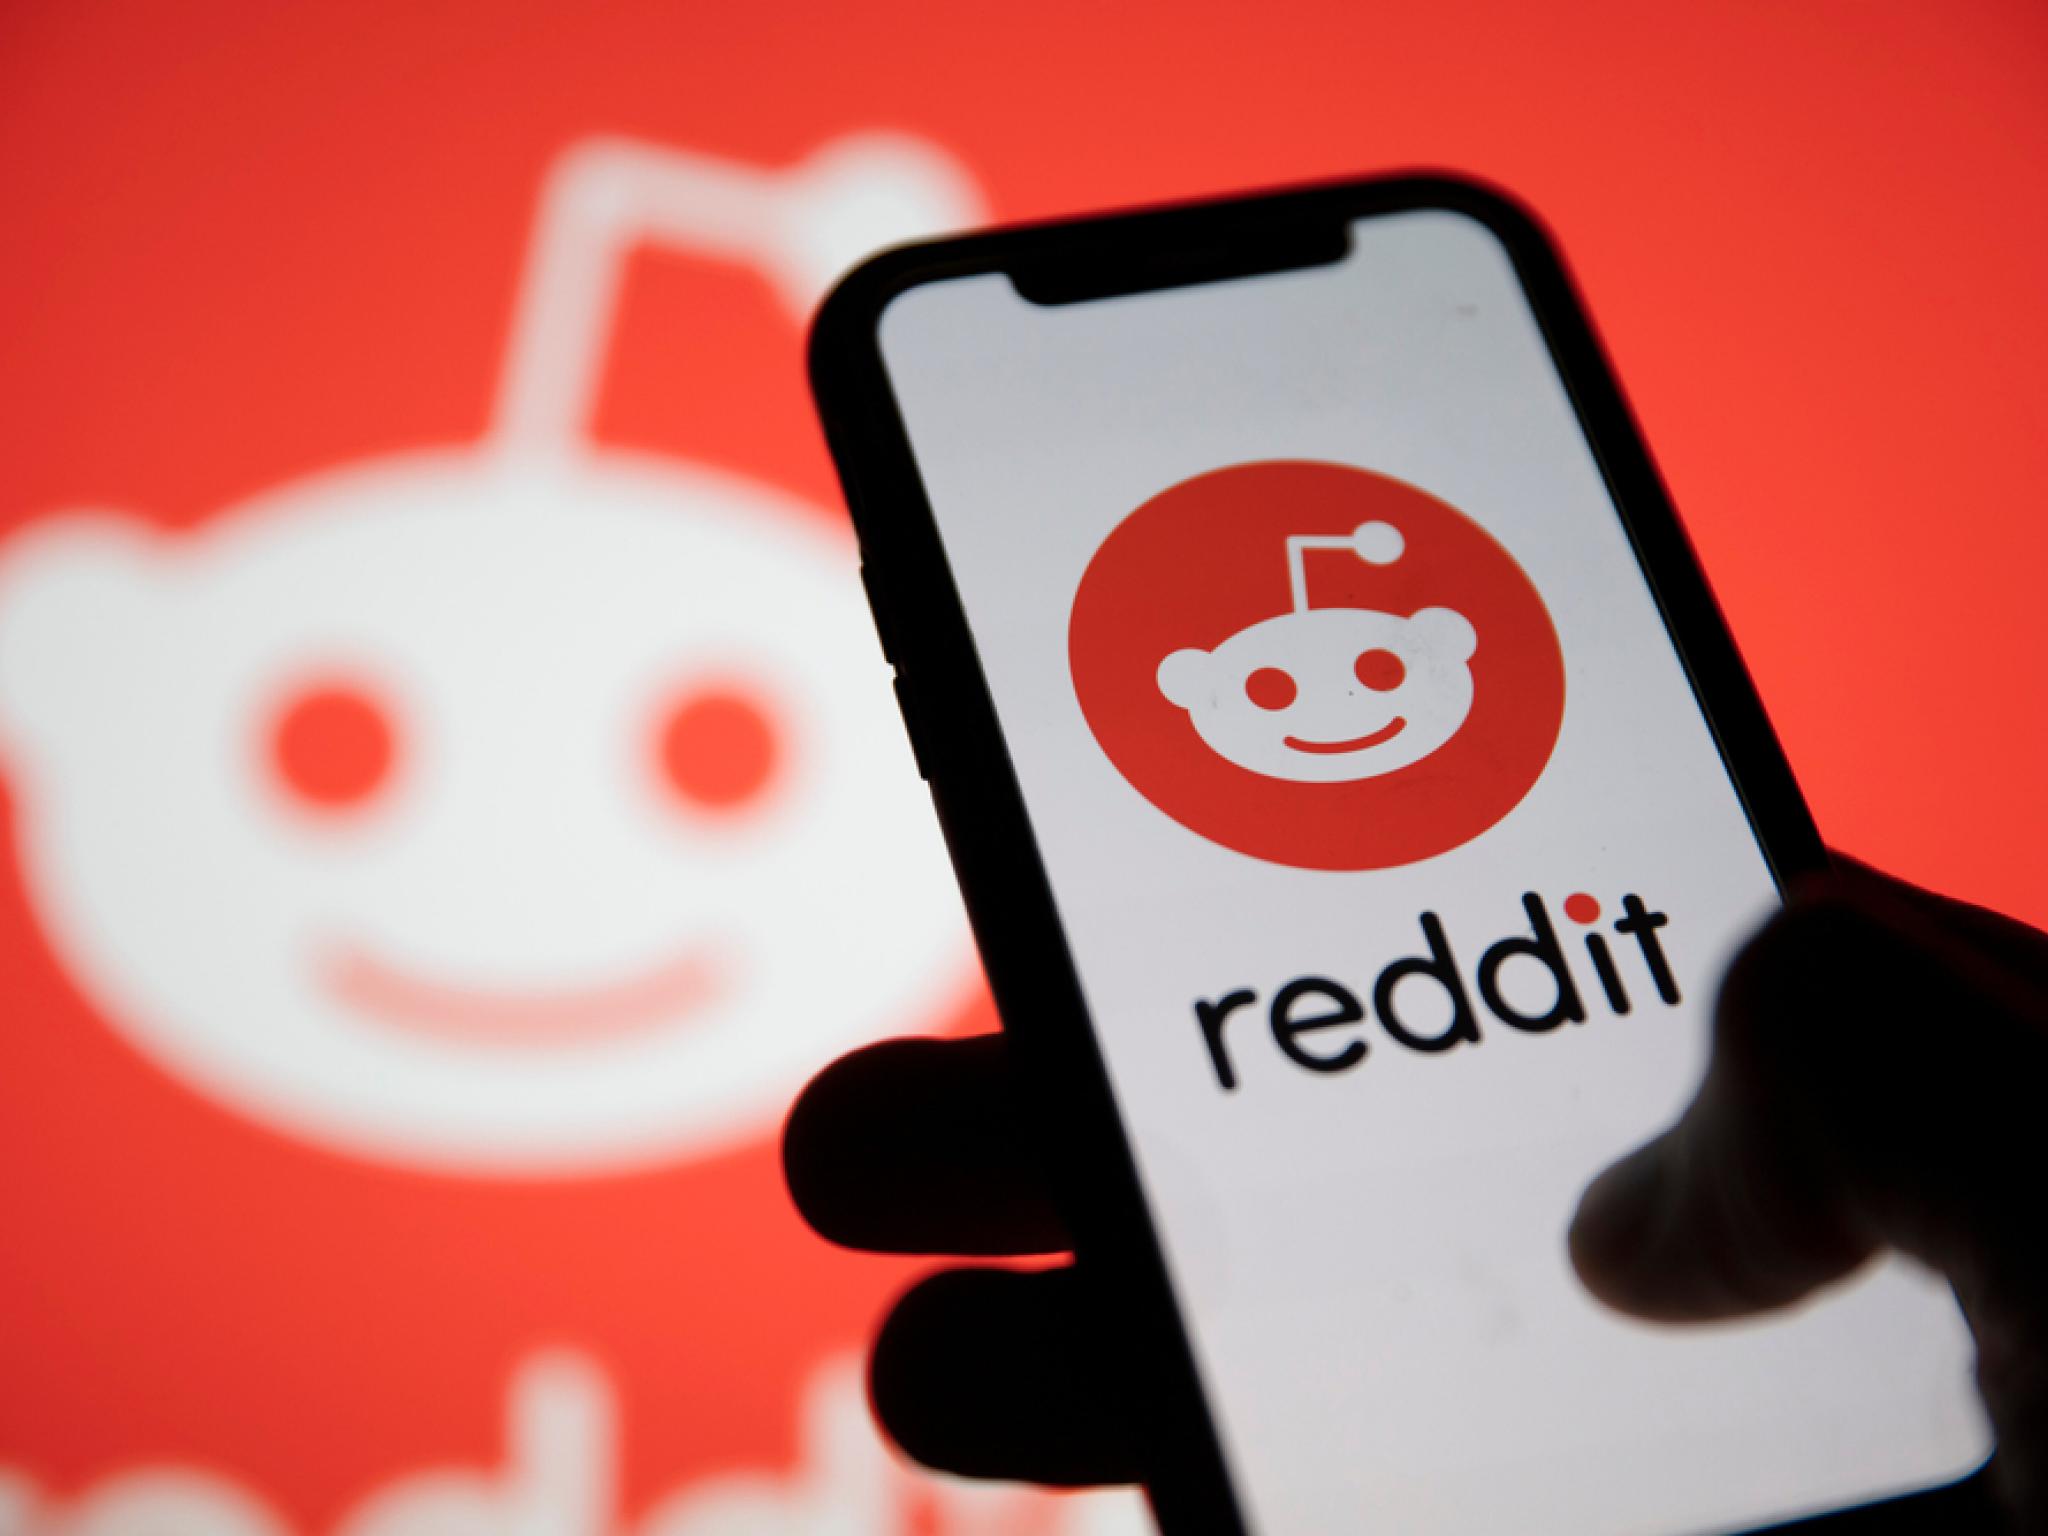  whats-going-on-with-reddit-shares-friday-on-heels-of-openai-partnership 